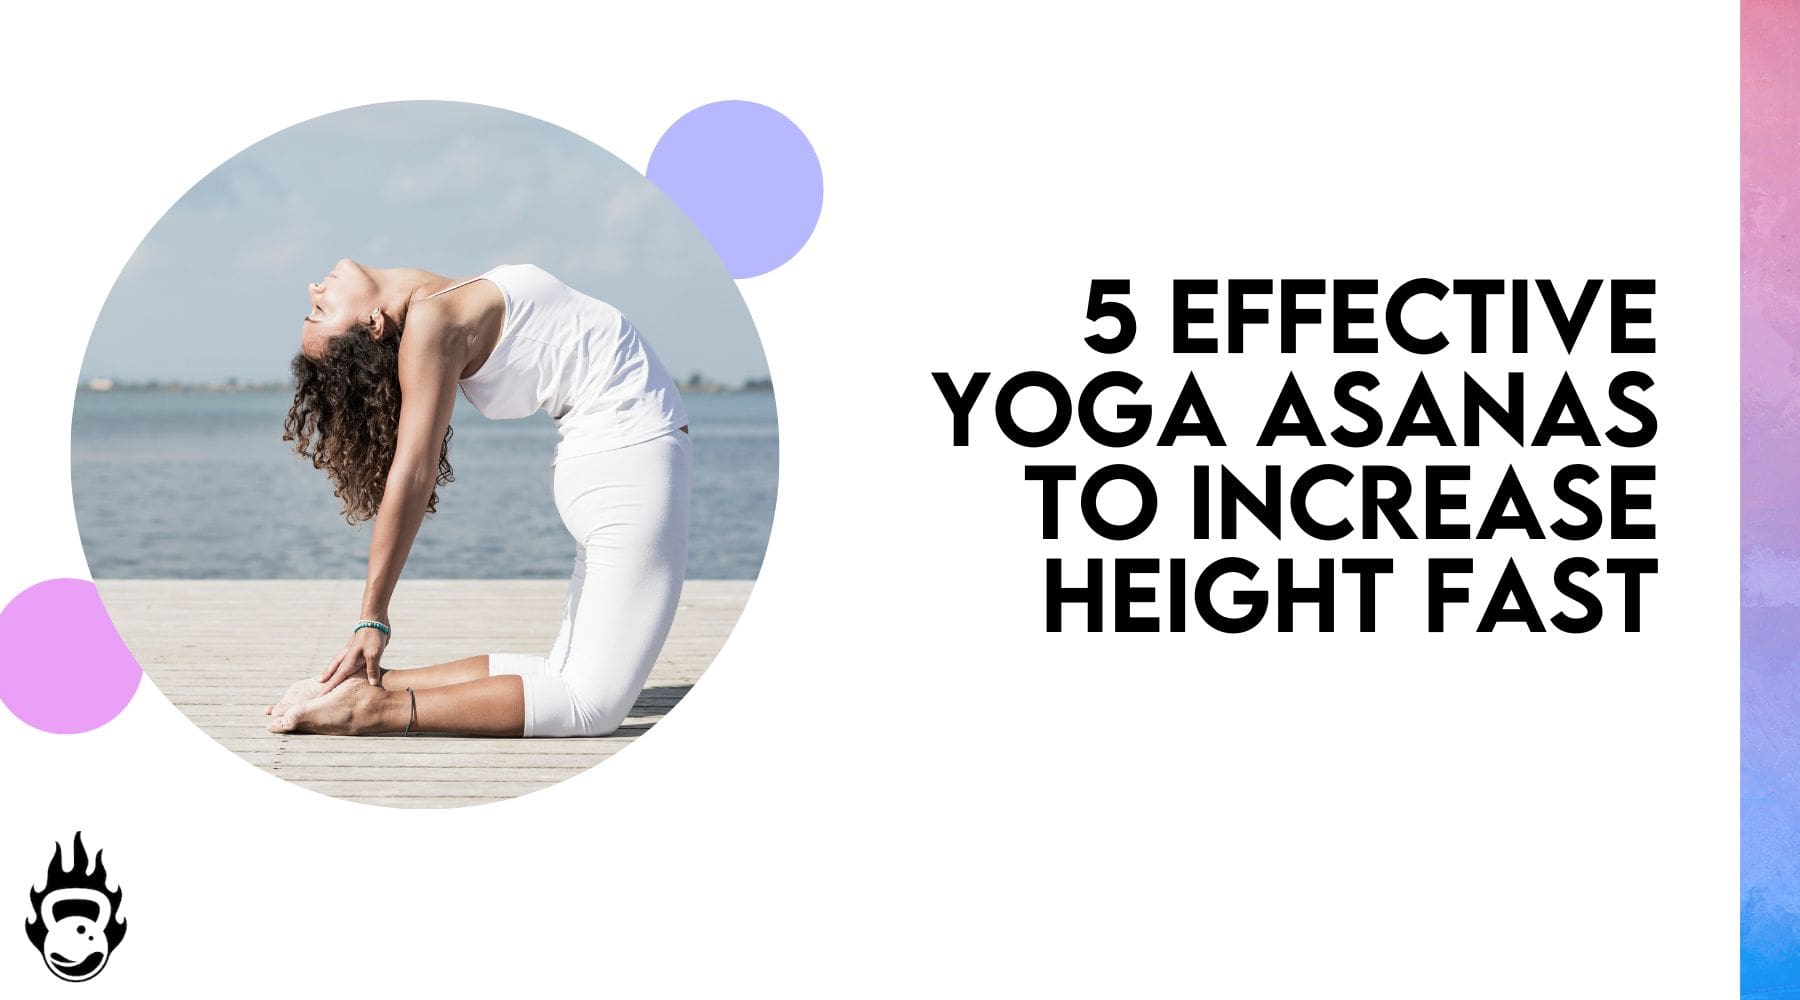 5 Effective Yoga Asanas To Increase Height Fast